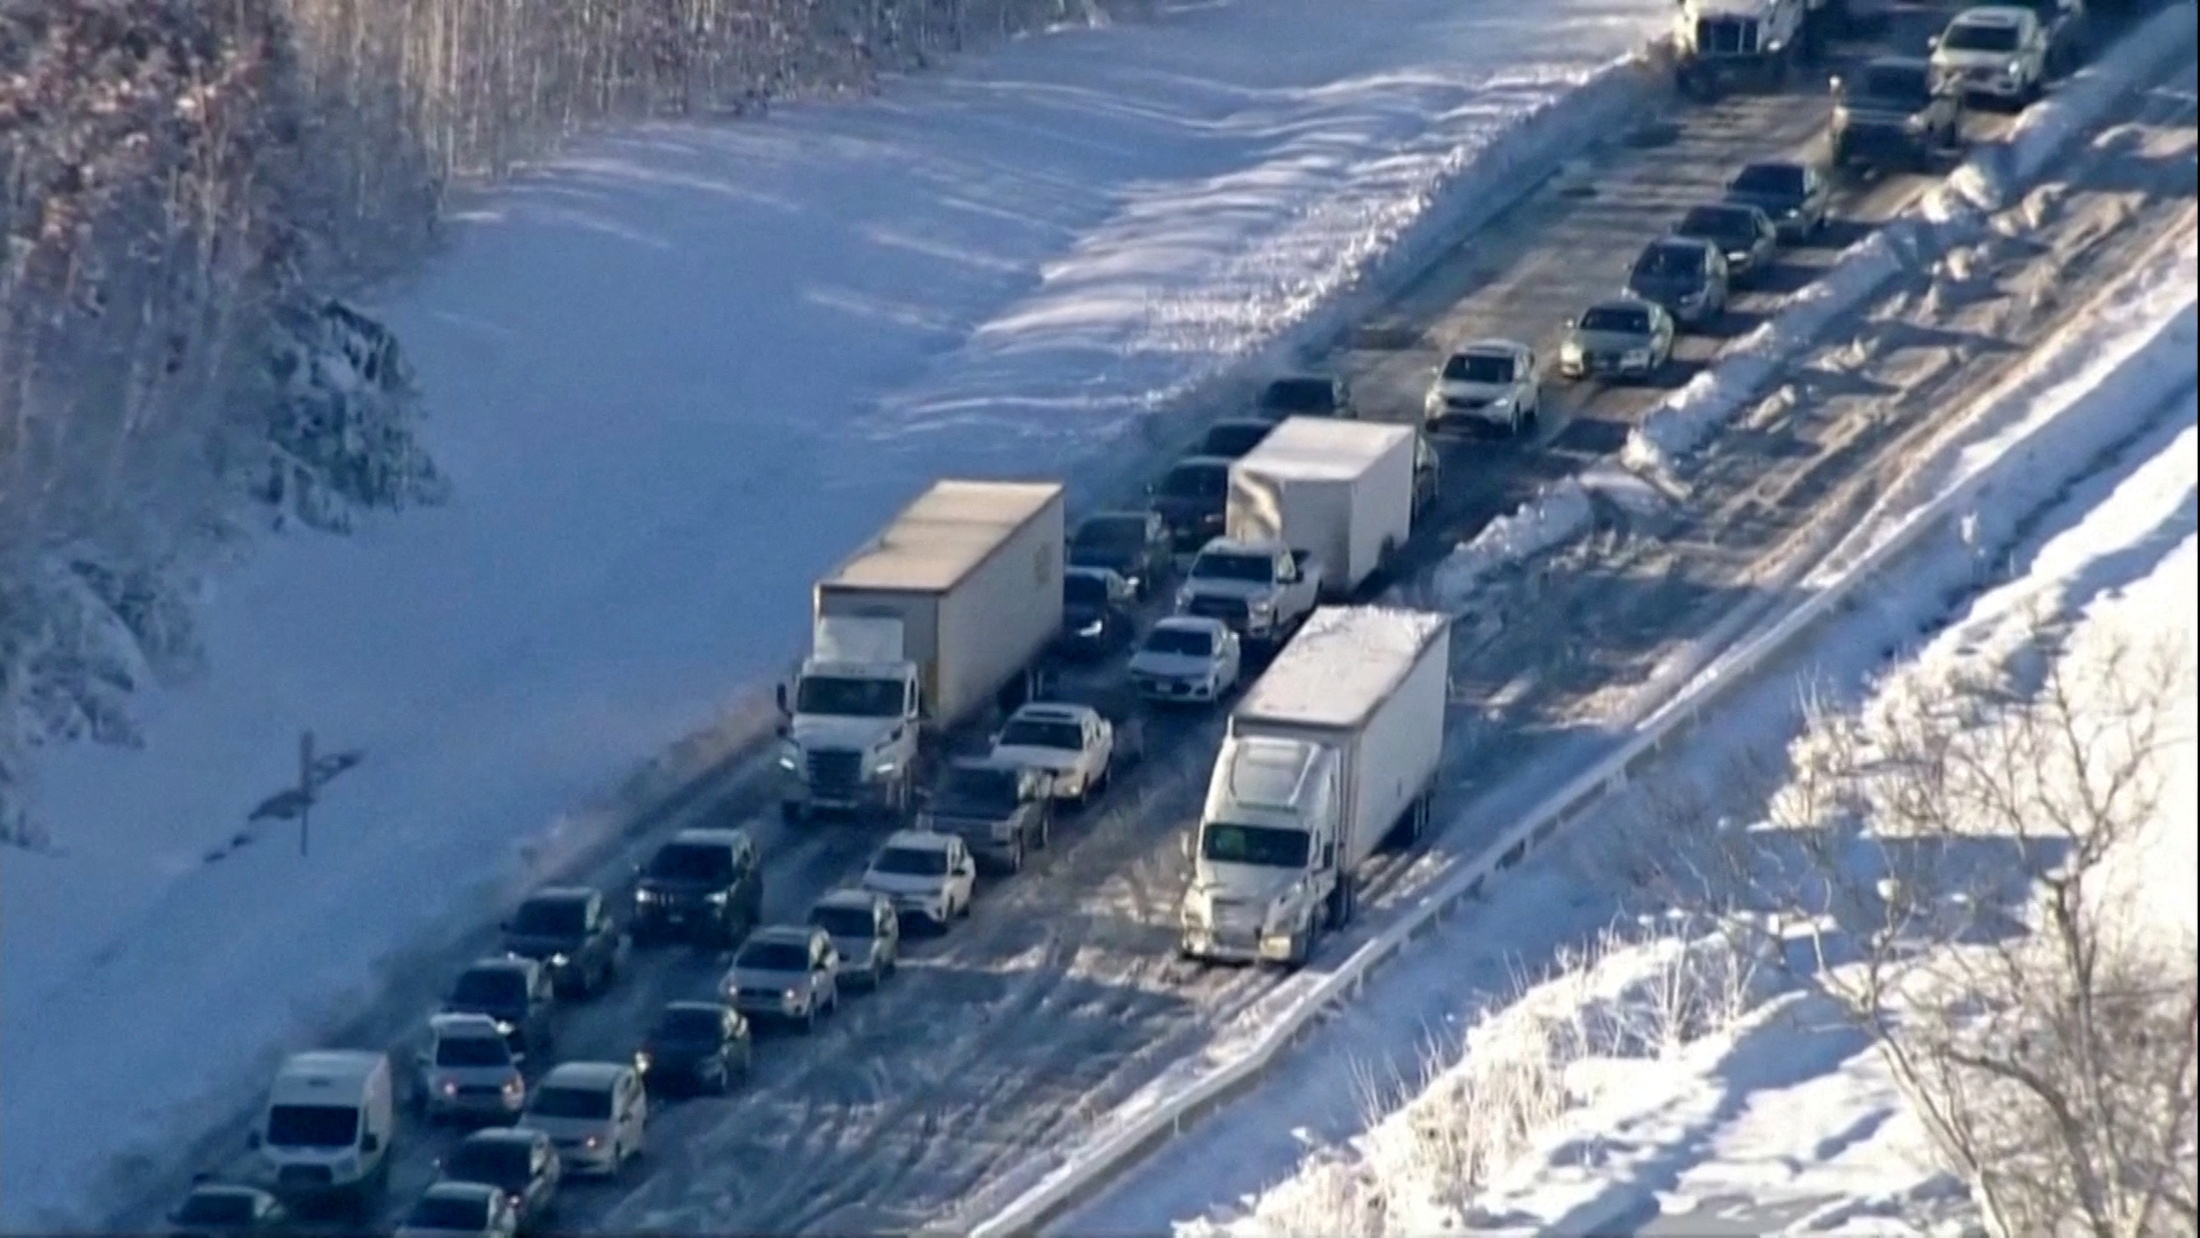 Vehicles are seen in a still image from video as authorities worked to reopen an icy stretch of Interstate 95 closed after a storm blanketed the U.S. region in snow a day earlier, near Garrisonville, Virginia, U.S. January 4, 2022.  ABC/WJLA via REUTERS 